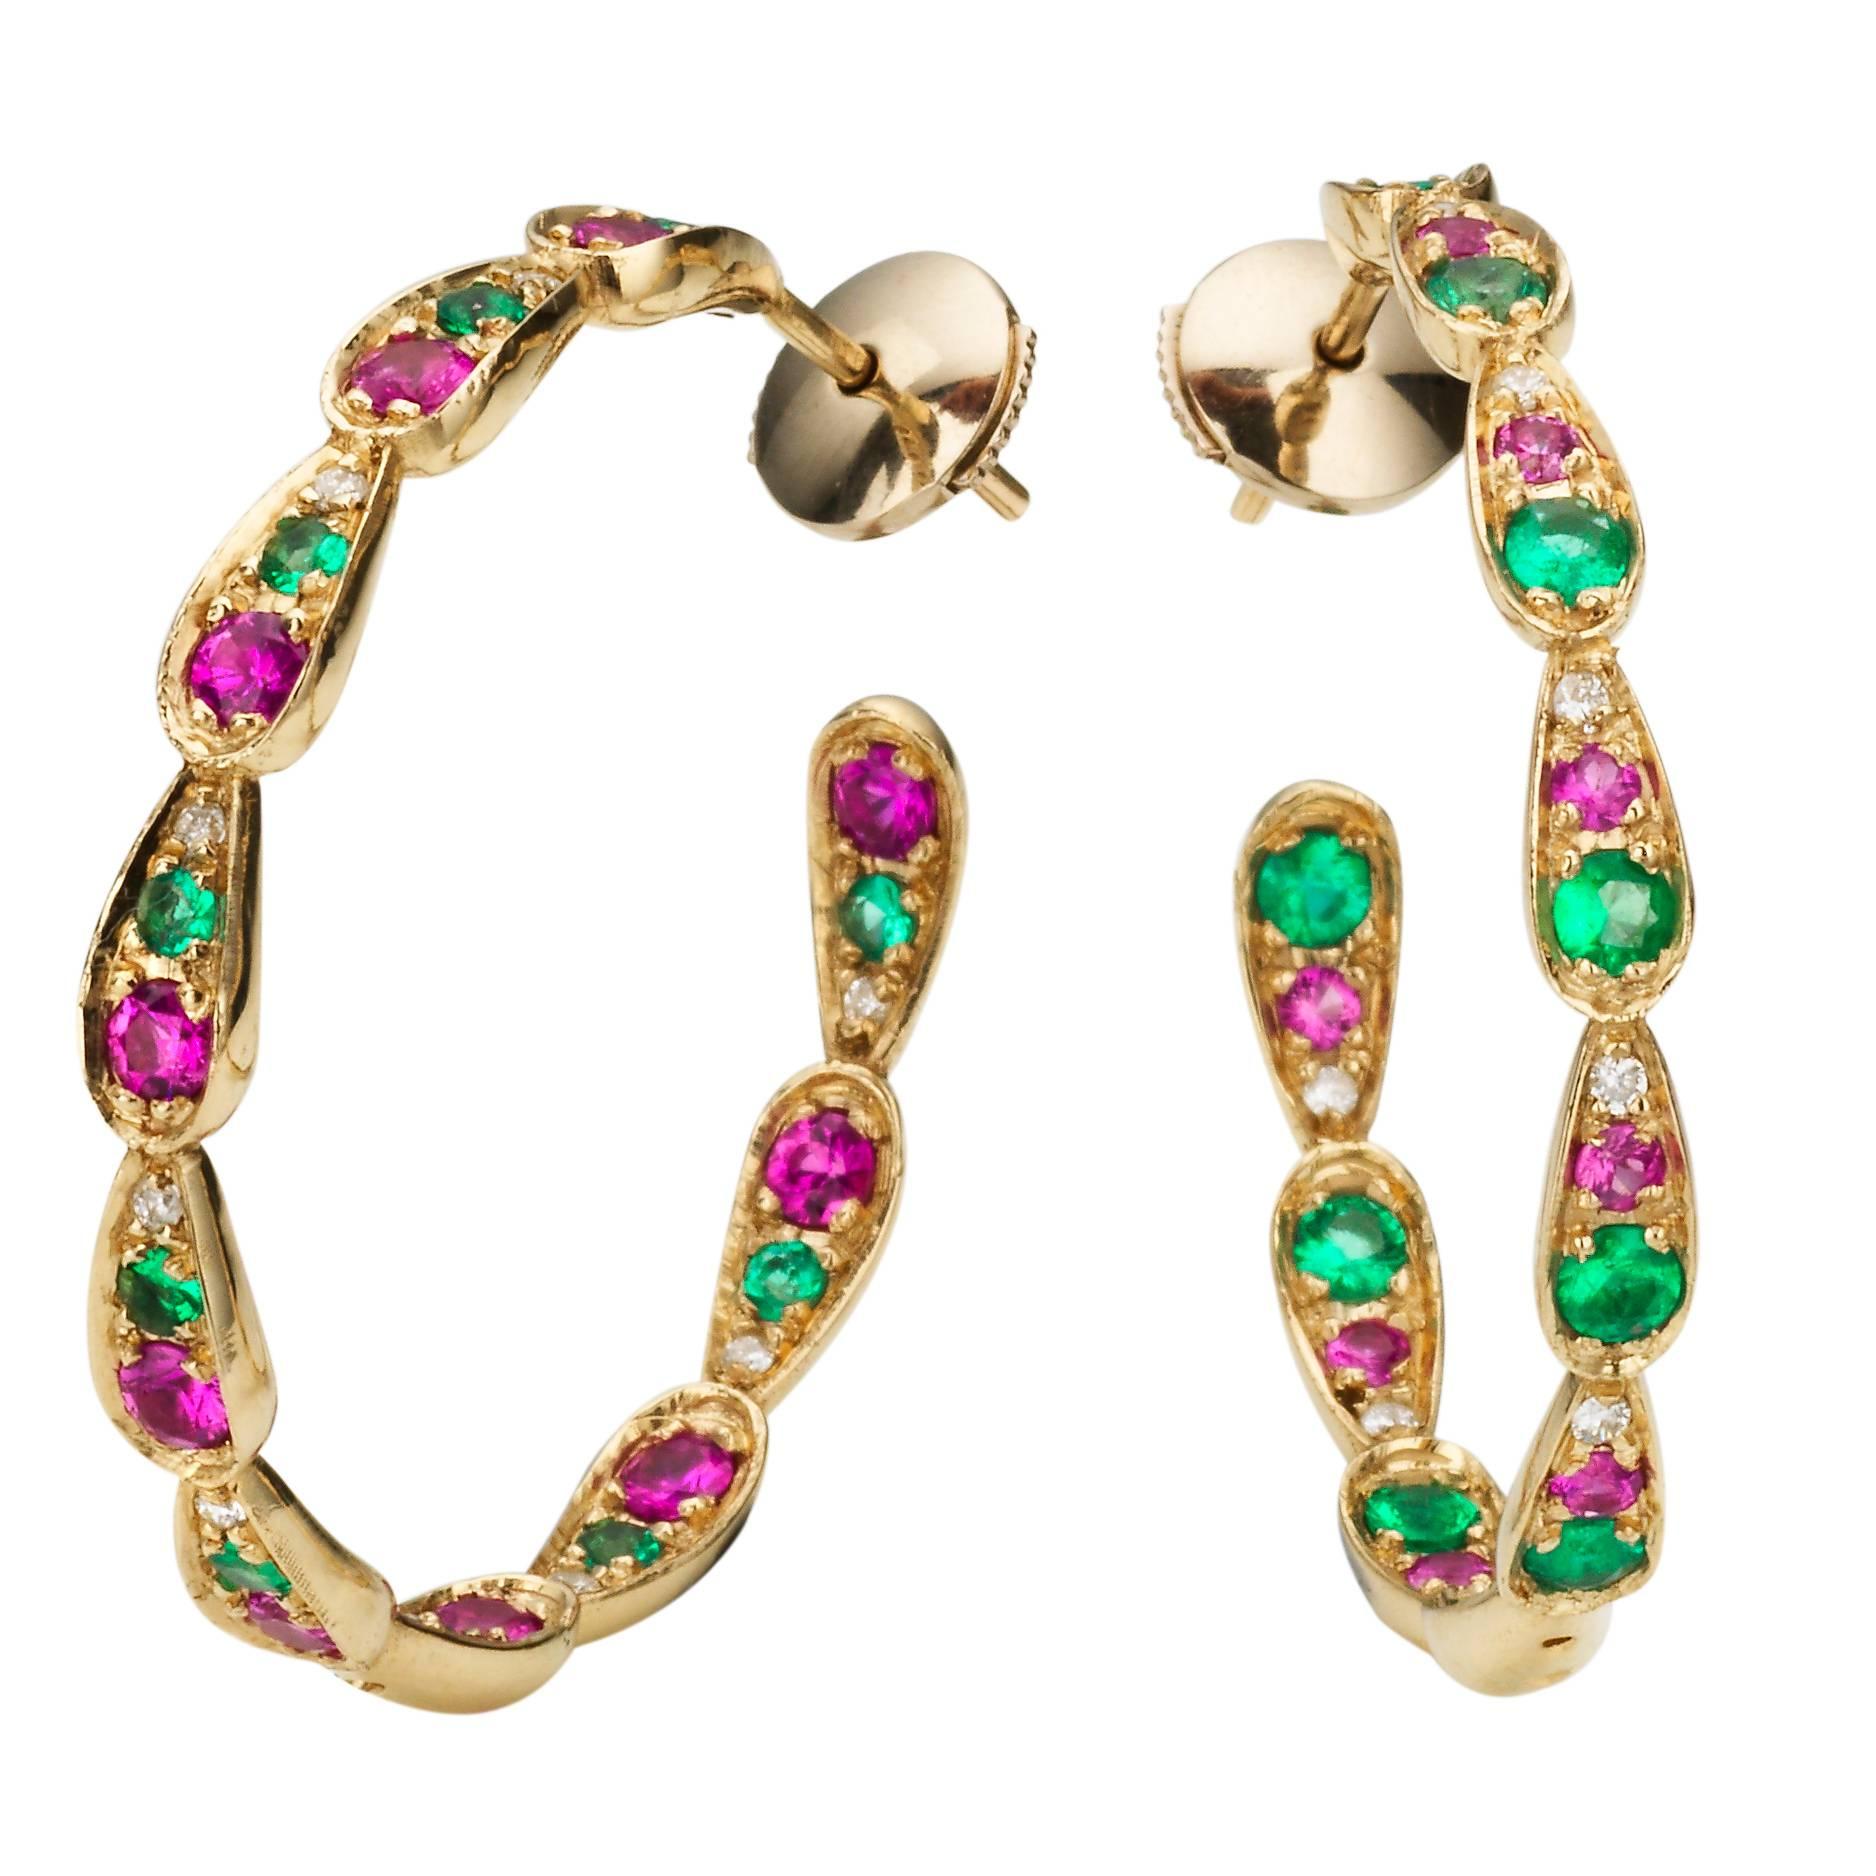 Sabine Getty 18kt Gold Harlequin Hoop Earrings with Diamond, Sapphire & Emerald For Sale